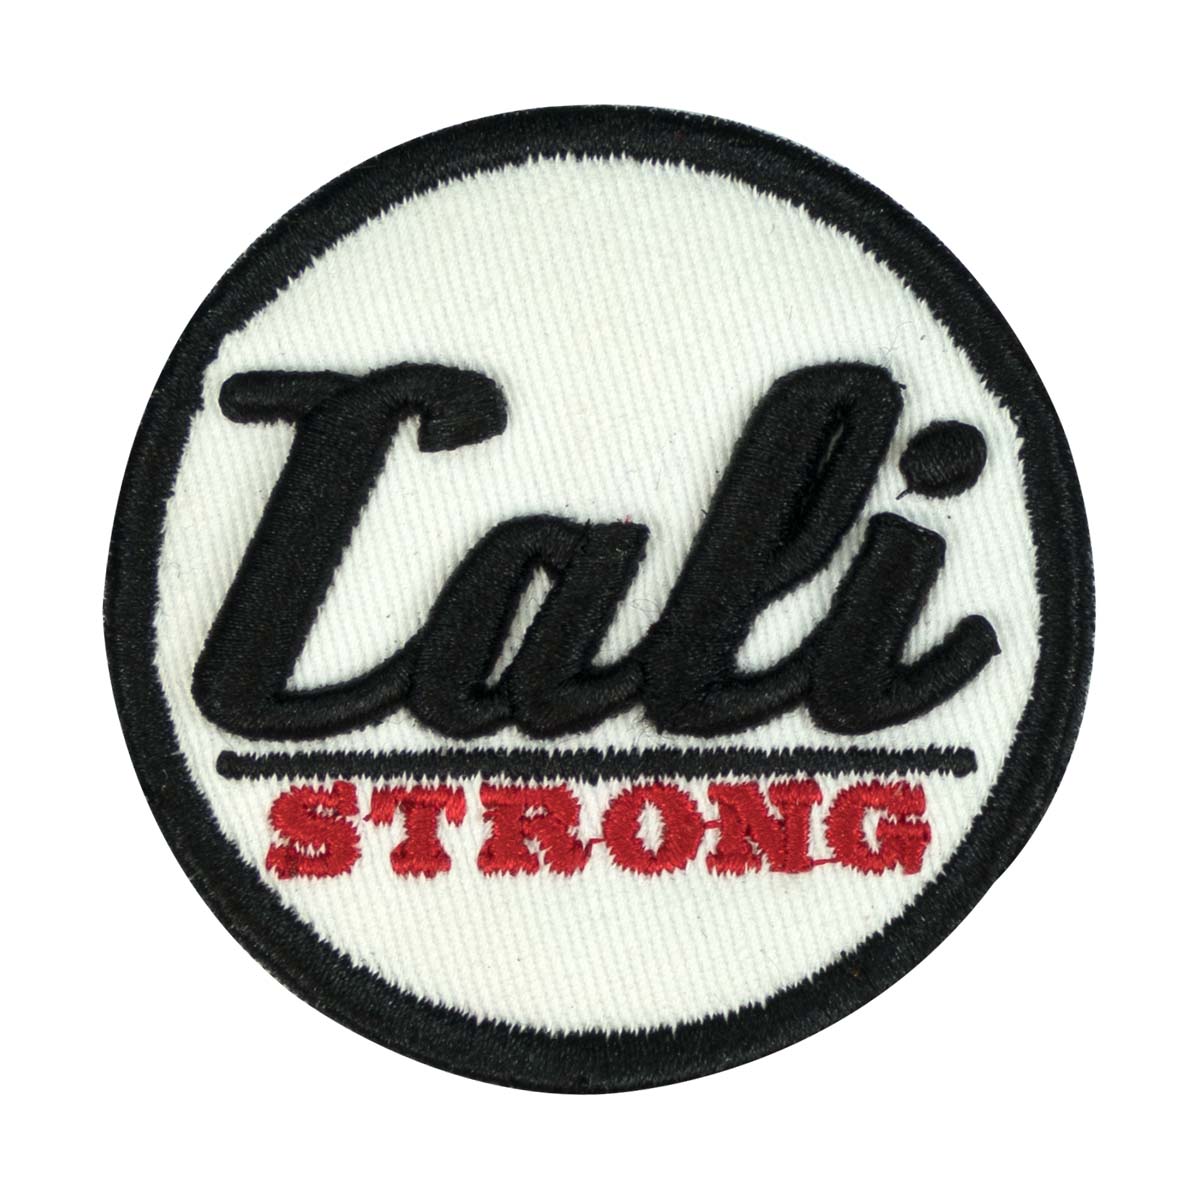 CALI Strong Black Red White 3D Hook-and-Loop Morale Patch - Patches - Image 1 - CALI Strong